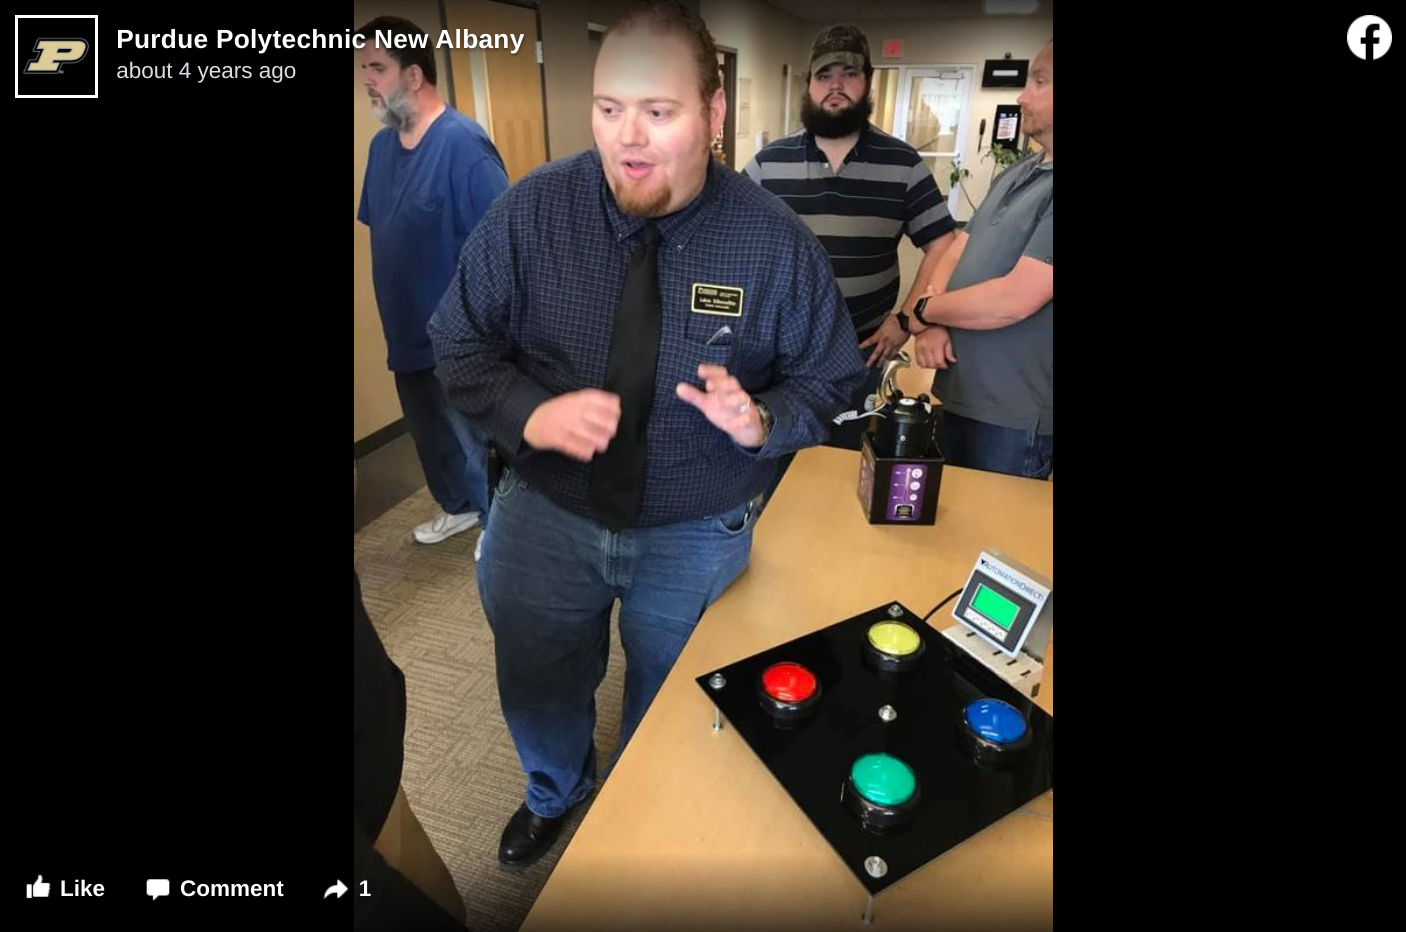 Lukas W. DiBeneditto is featured on Purdue University Social Media for presenting a recreation of the Simon game Penny Arcade at the 2019 Boilermaker Showcase.